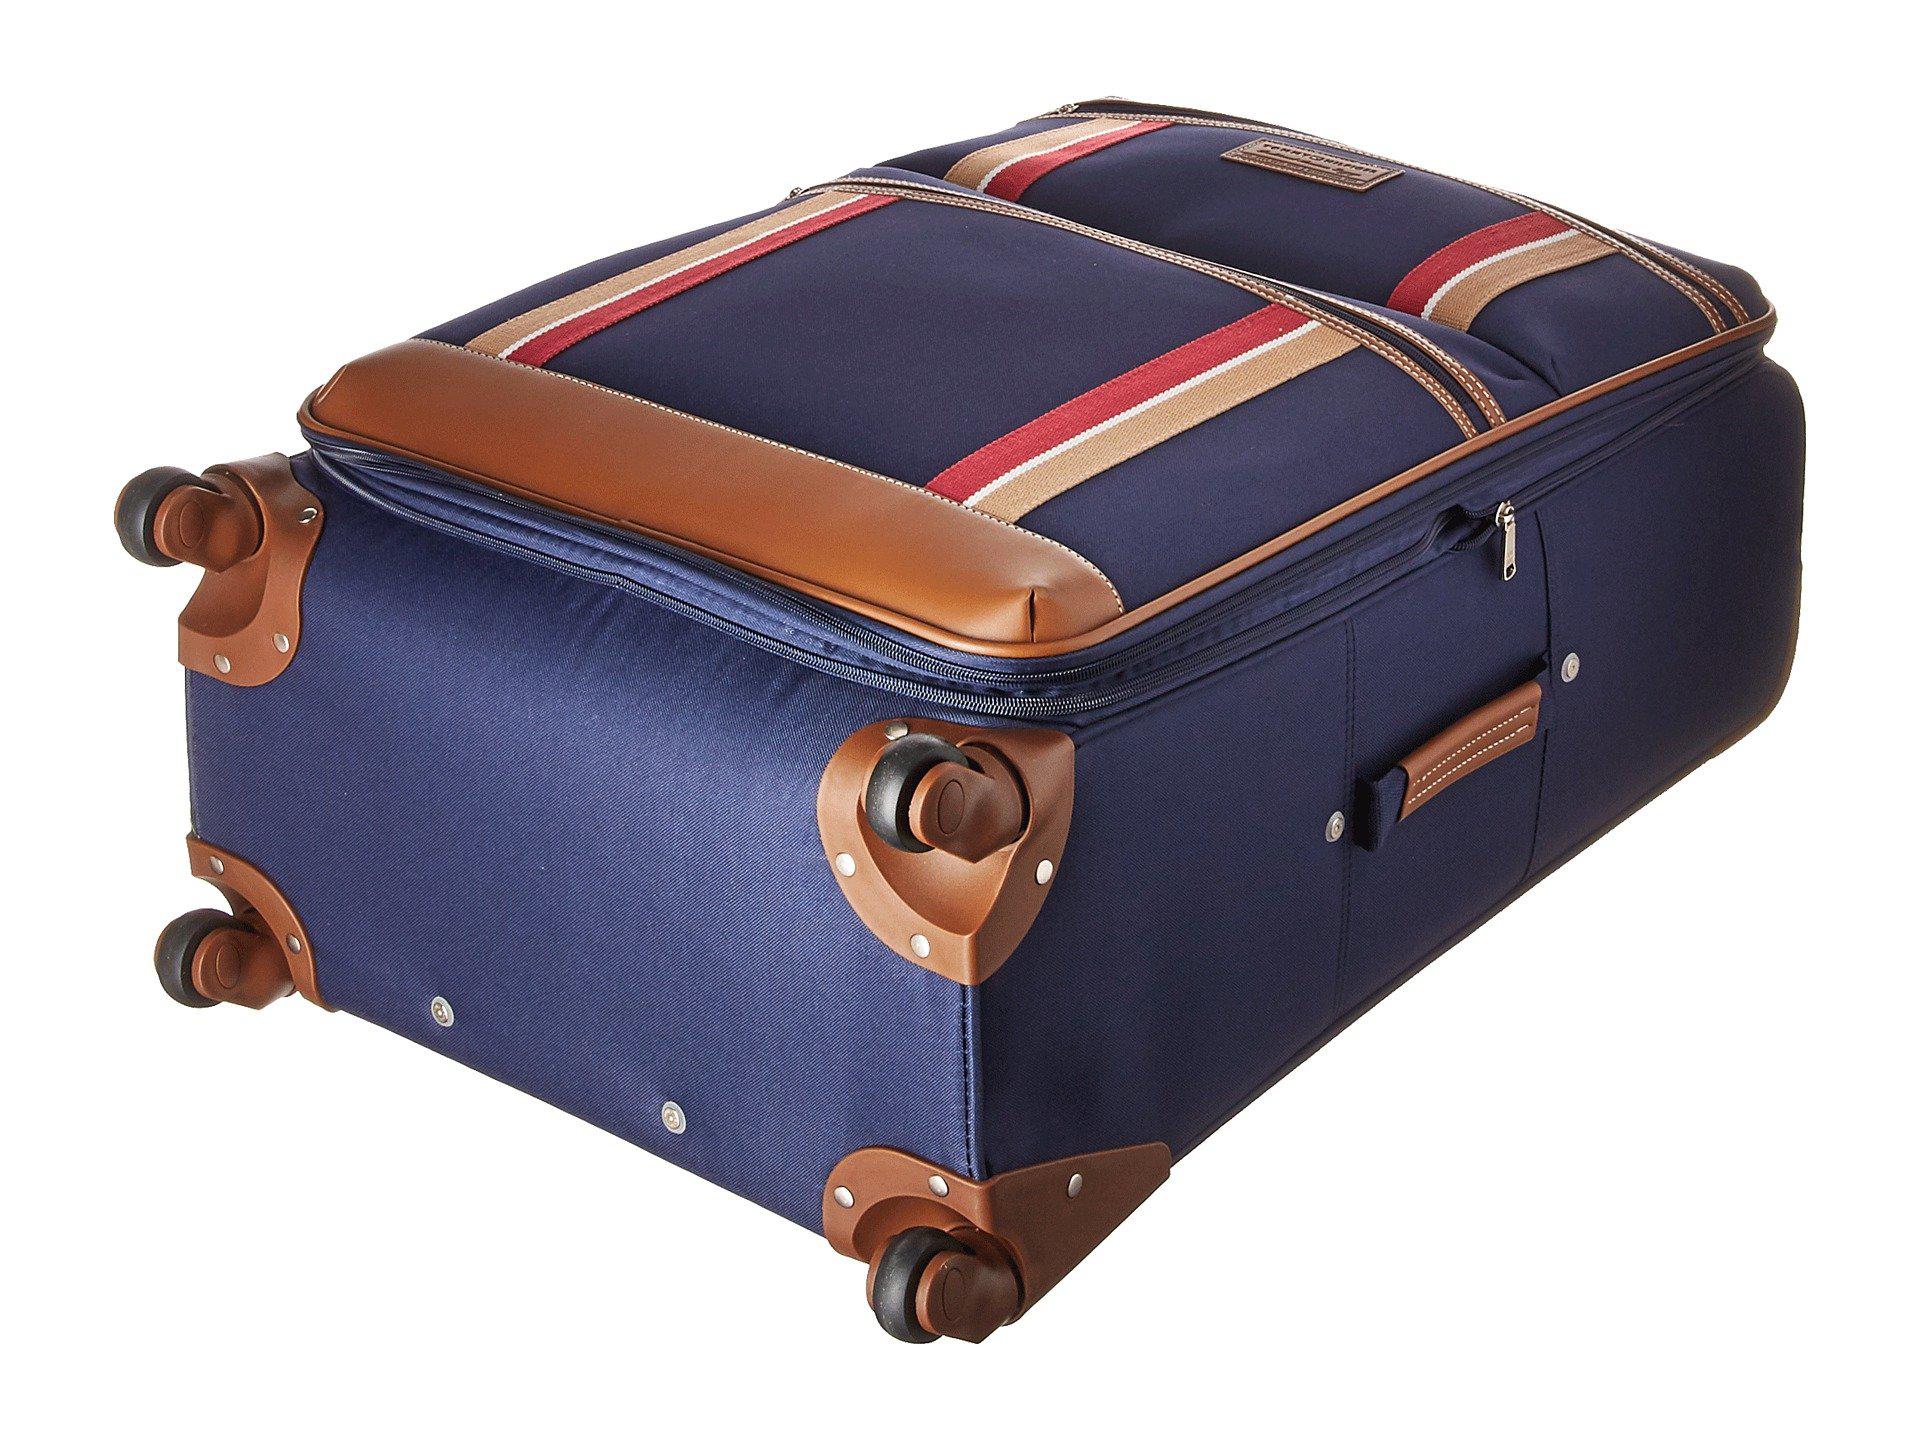 Tommy Hilfiger Scout 4.0 28 Upright Suitcase (navy) Luggage in Blue - Lyst